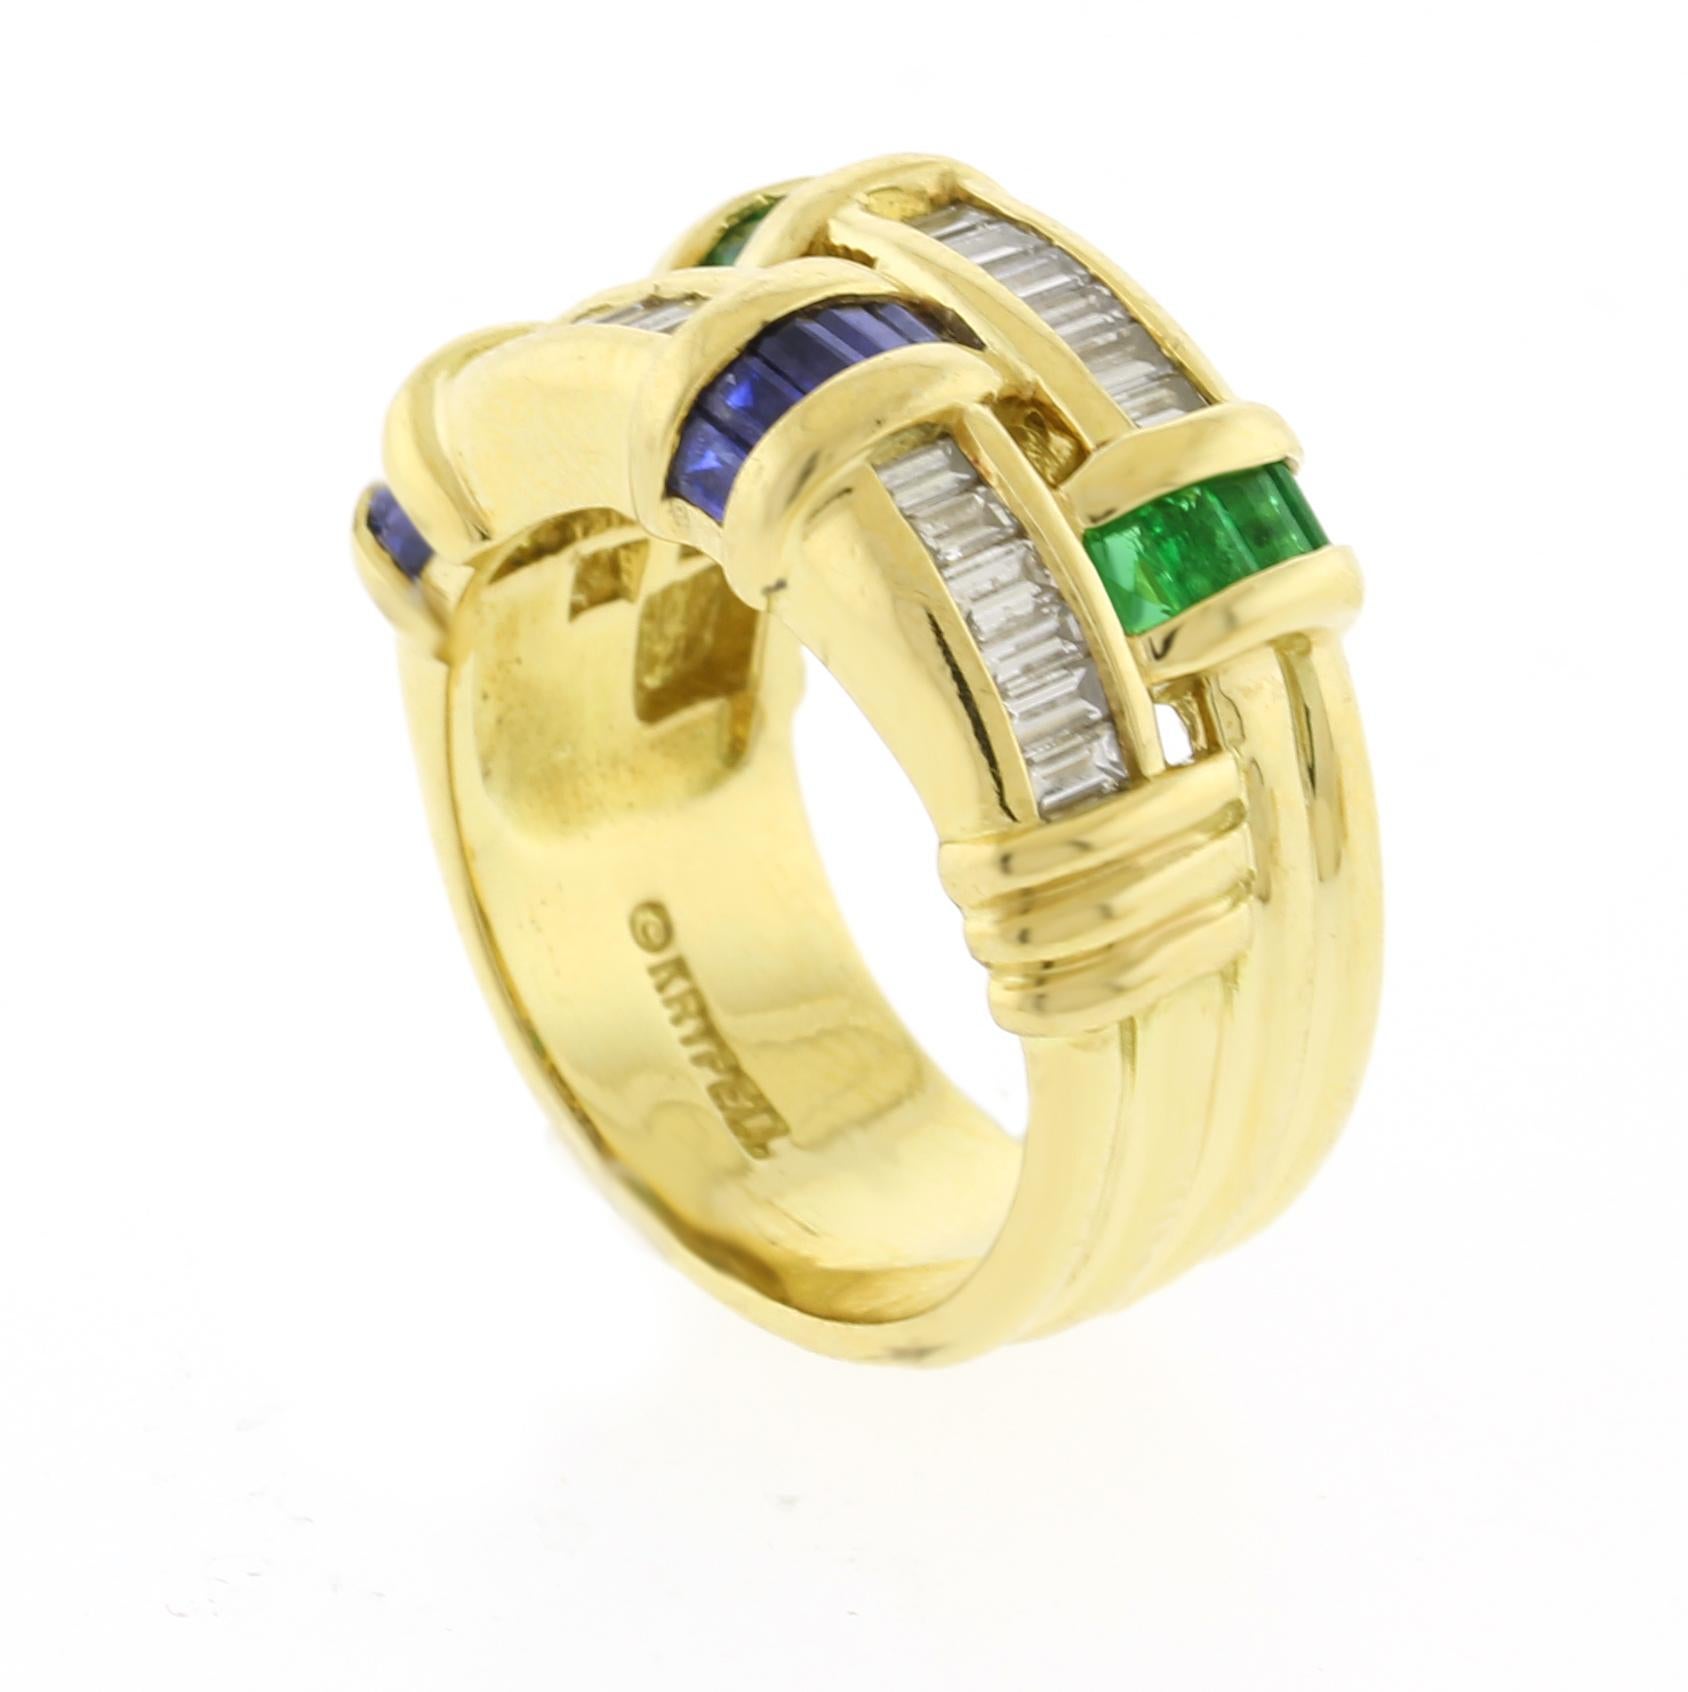 This ring contains has 24 baguette diamonds, 10 baguette sapphires and 10 baguette emeralds.
♦ Designer: Charles Krypell
♦ Metal: 18 karat yellow gold
♦ Gemstone: Diamonds, Sapphires and Emeralds
♦ Gemstone Approximate weighs: Diamonds=1ct 
        